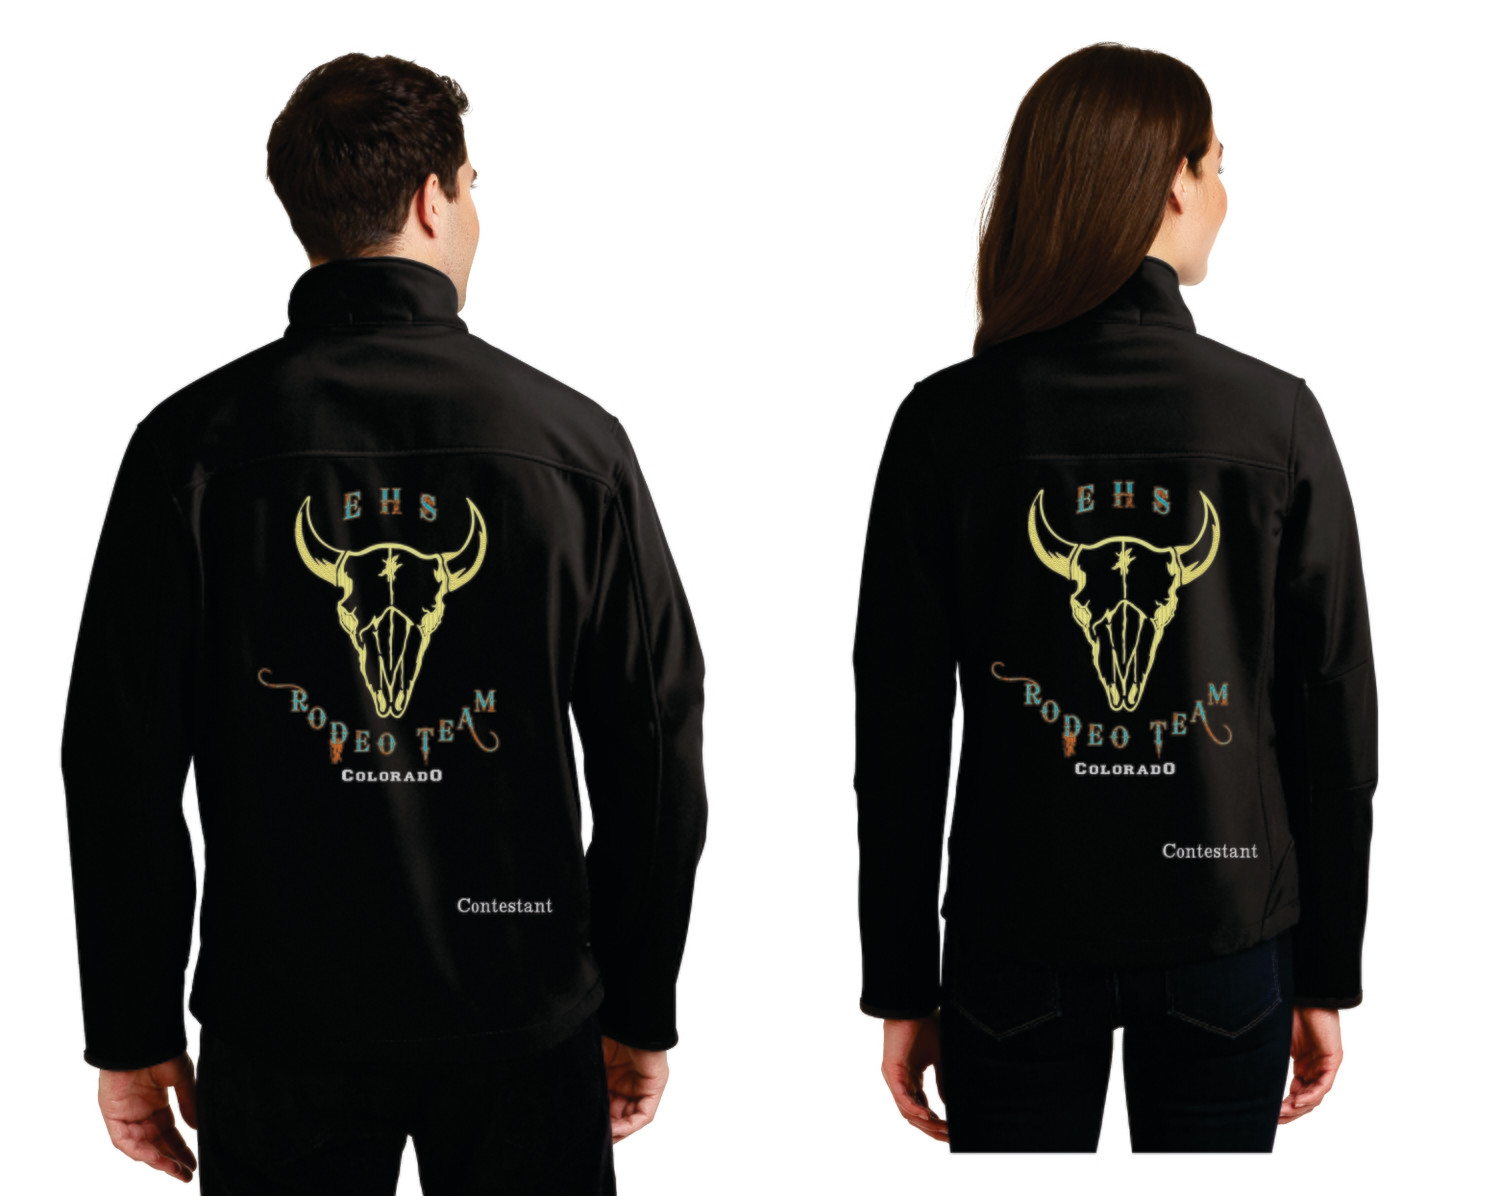 EHS Rodeo Competitor Jackets - Ladies and Mens